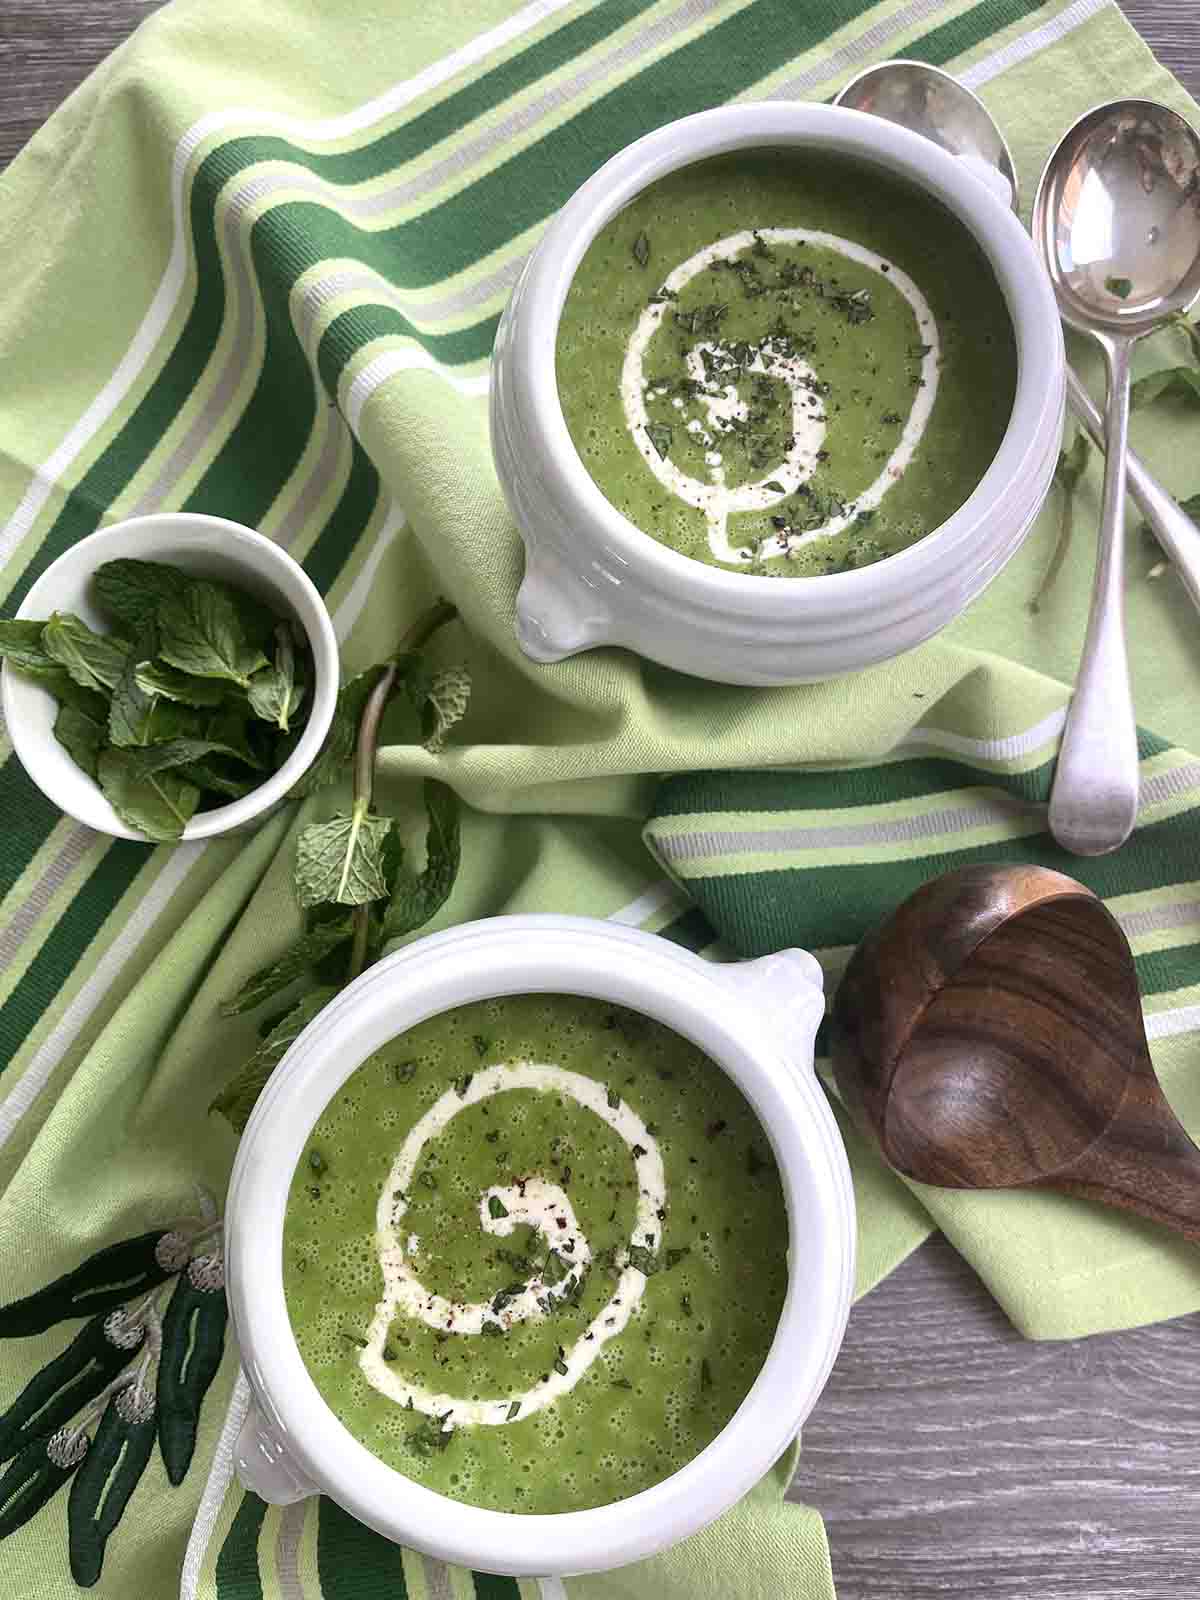 two bowls of soup and a green towel.